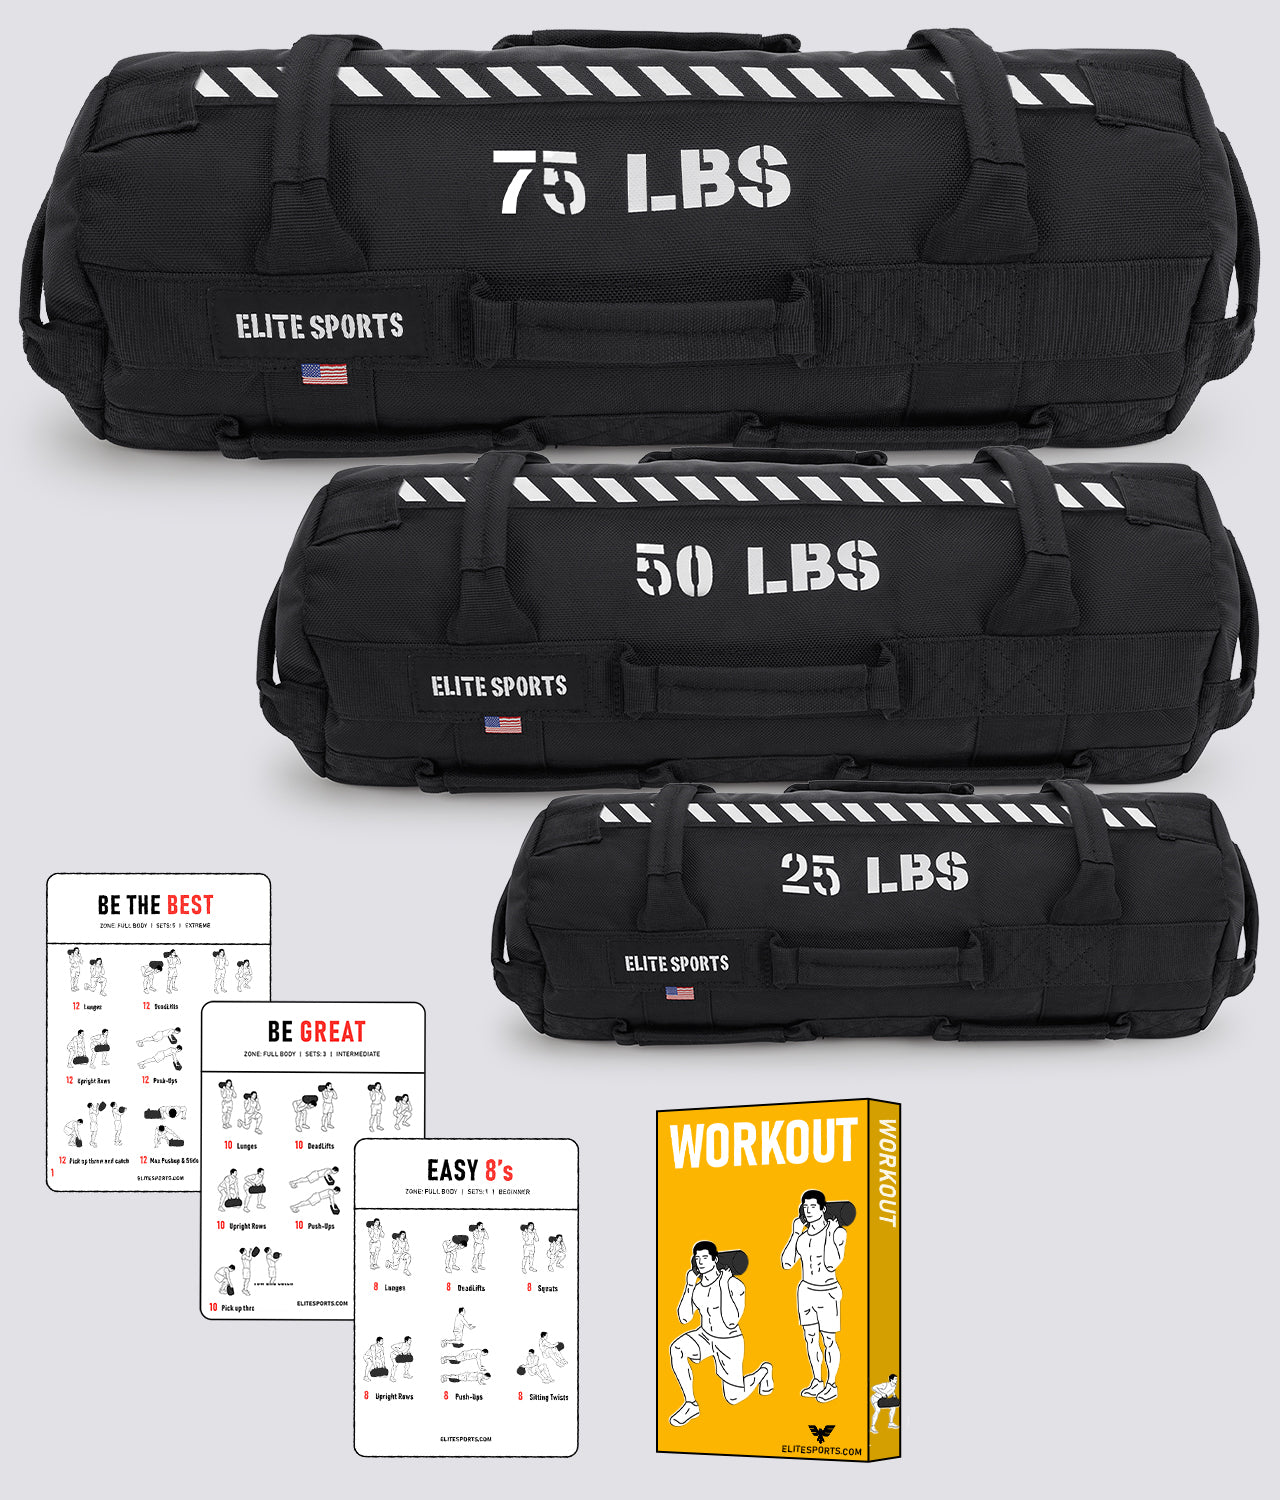 Elite Sports Core Duffel Workout Sandbag 75 lbs Included Workout Manuals